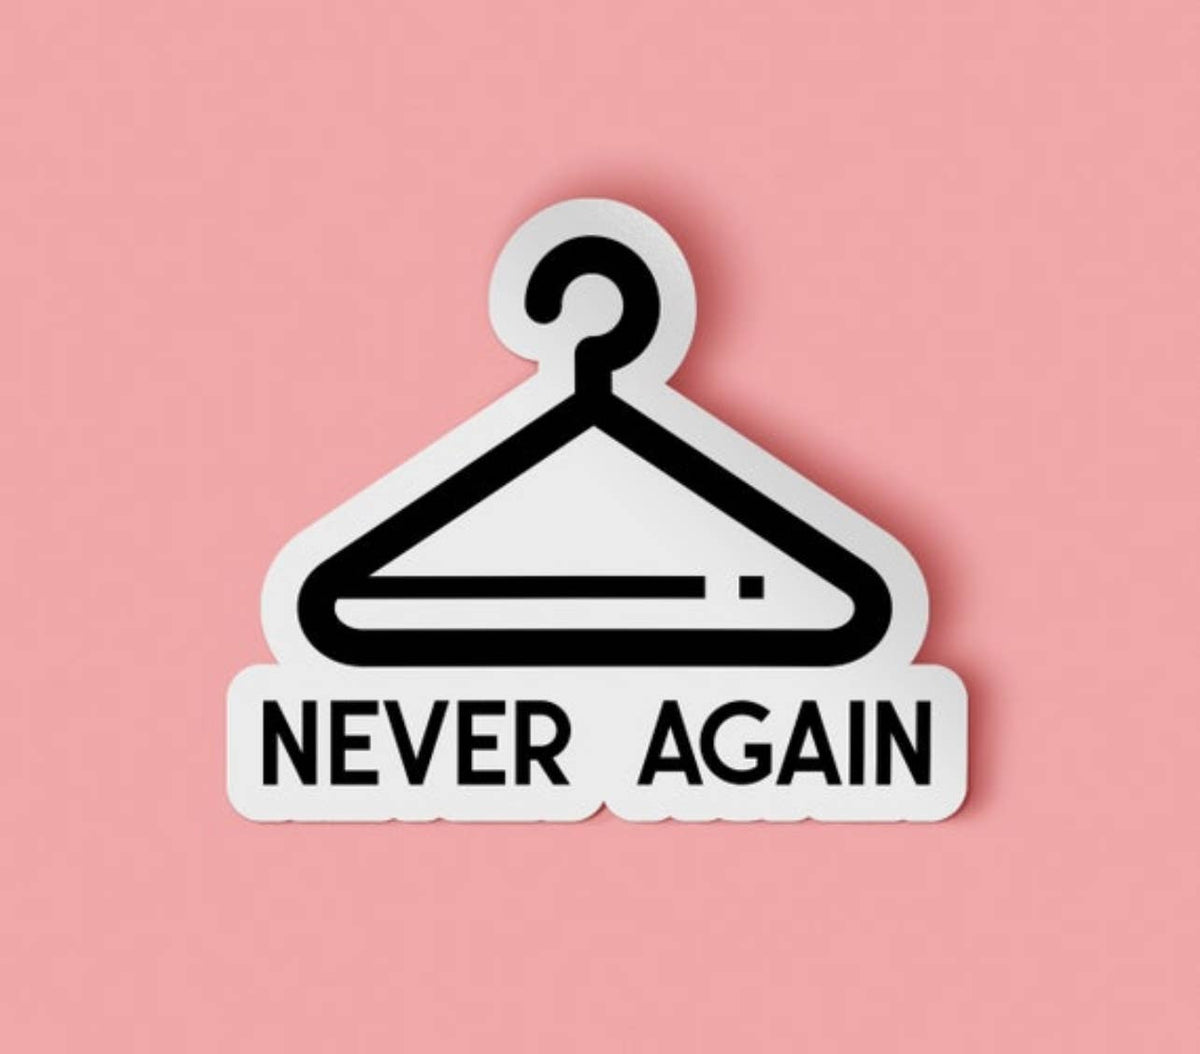 Coat Hanger Abortion Sticker Pro Choice Reproductive Rights